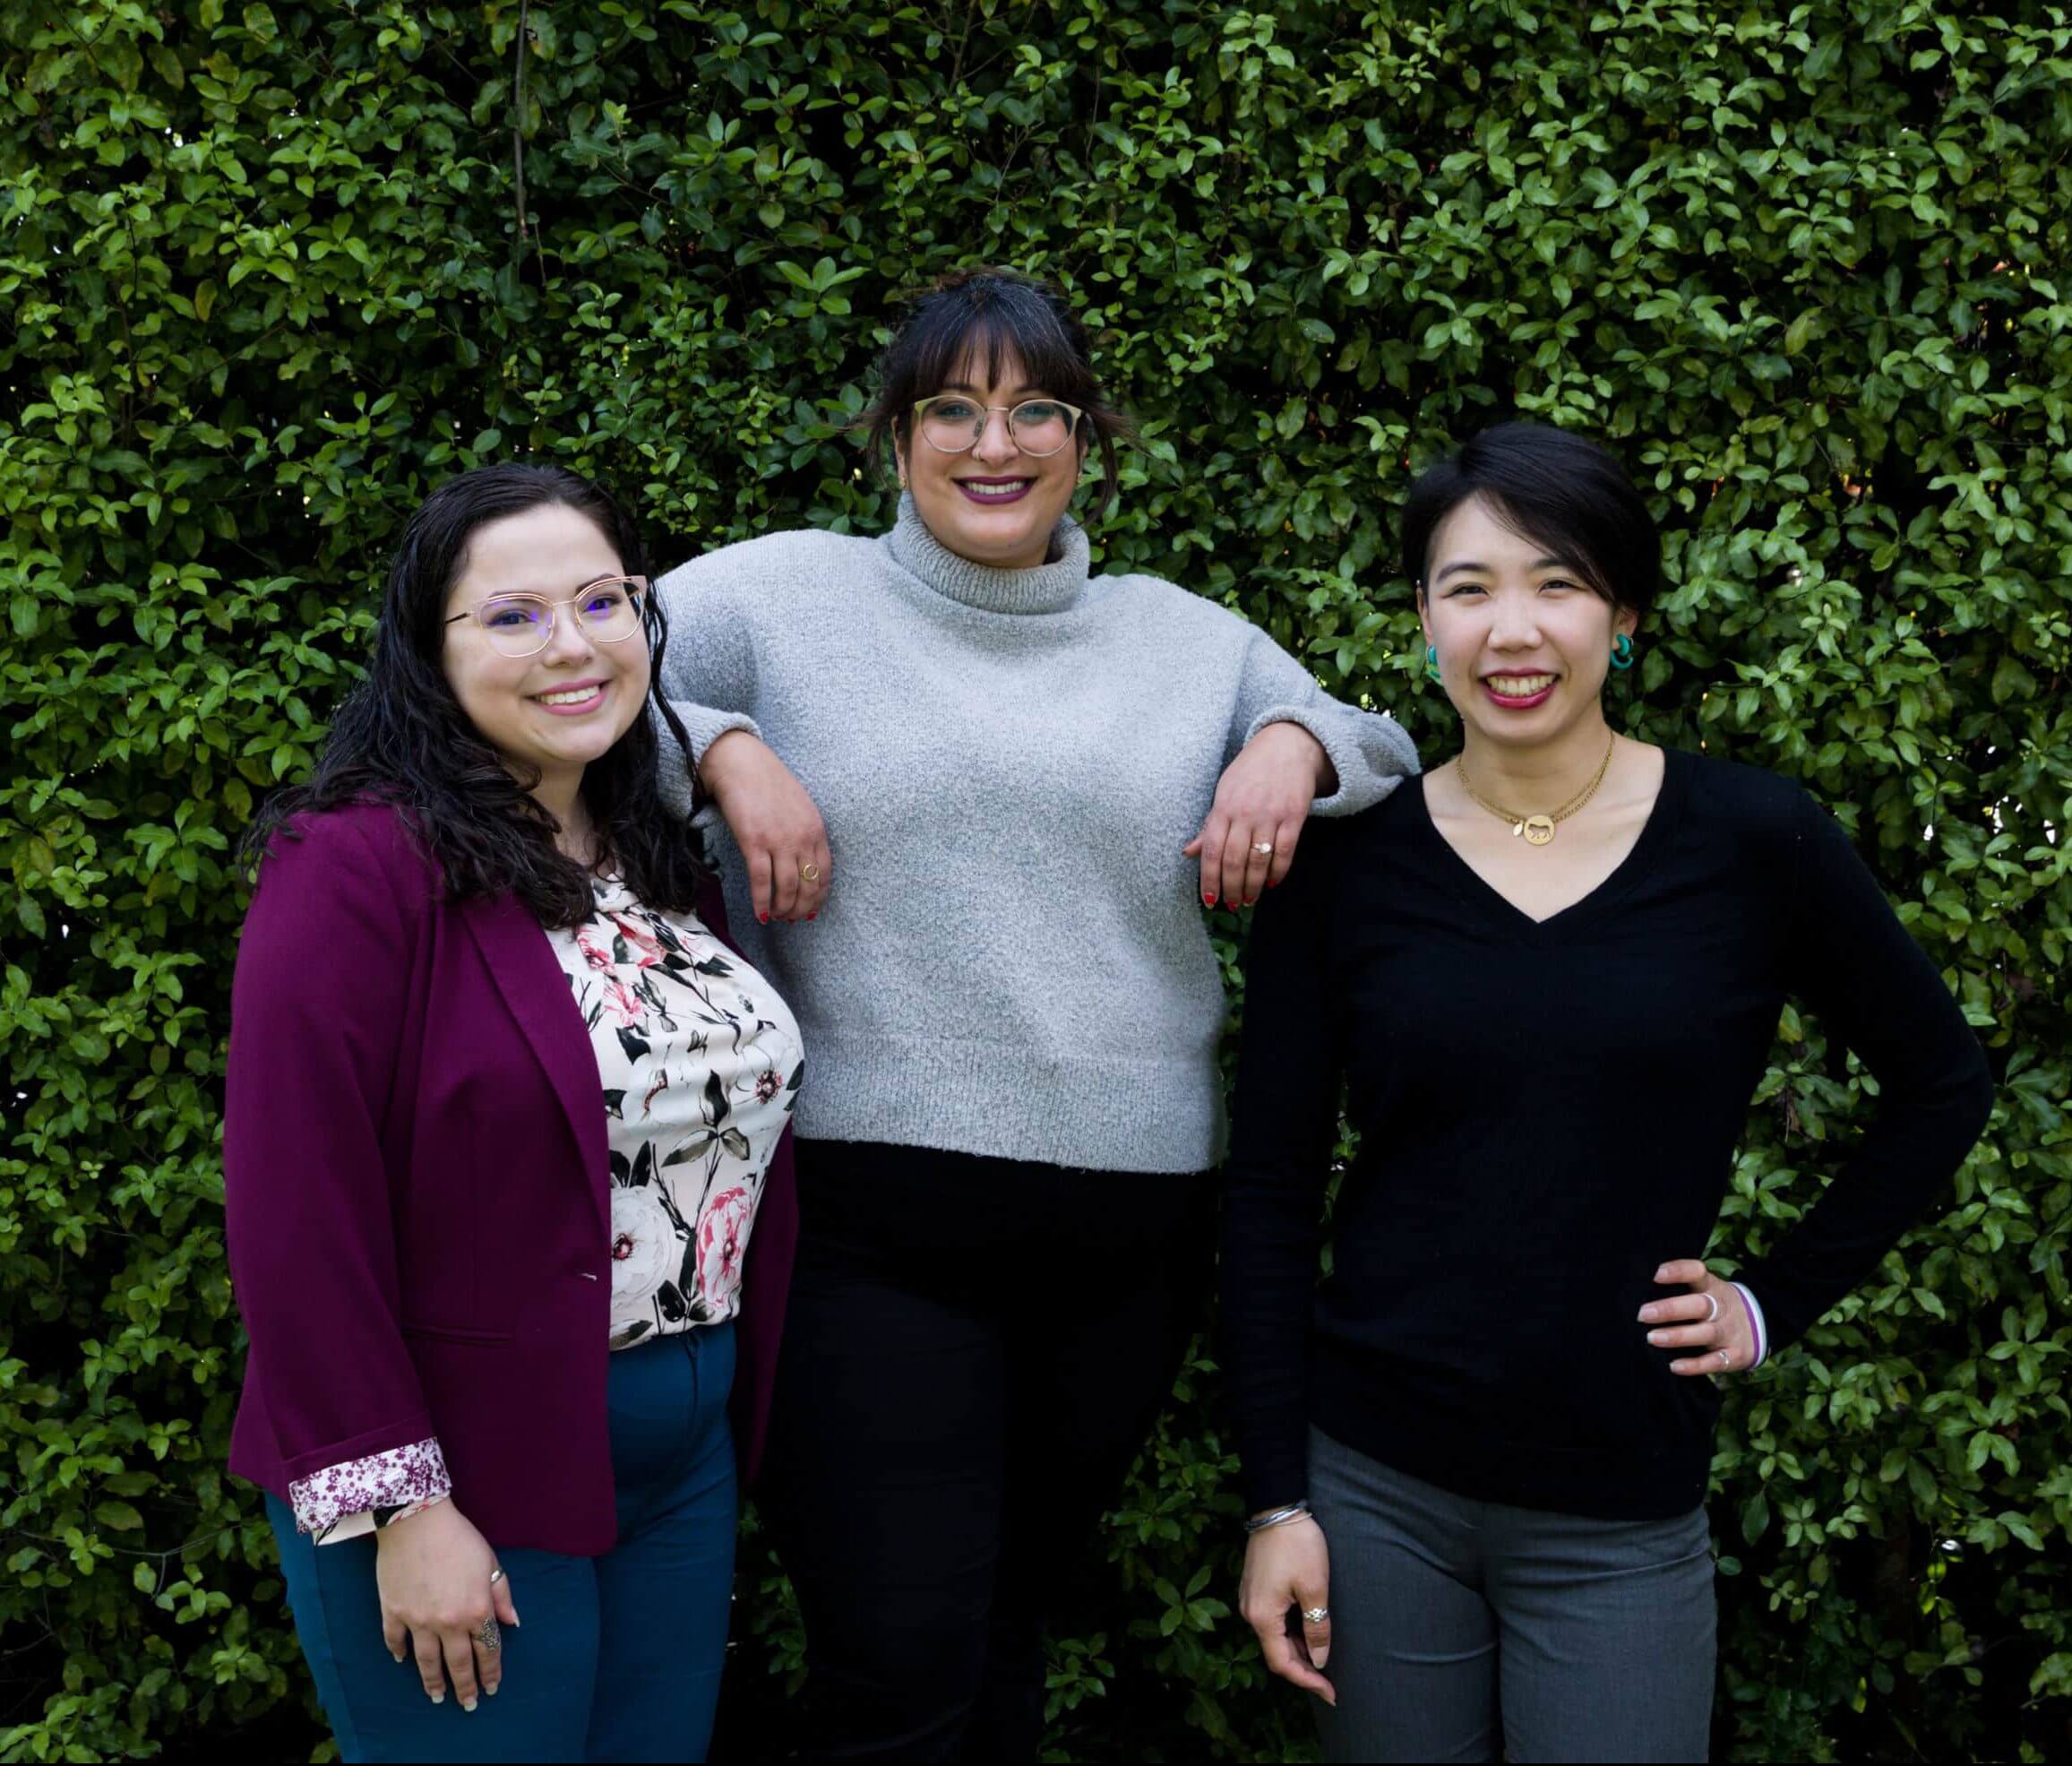 A group of three Stella Nova San Francisco therapists pose with smiles in front of a green hedge.